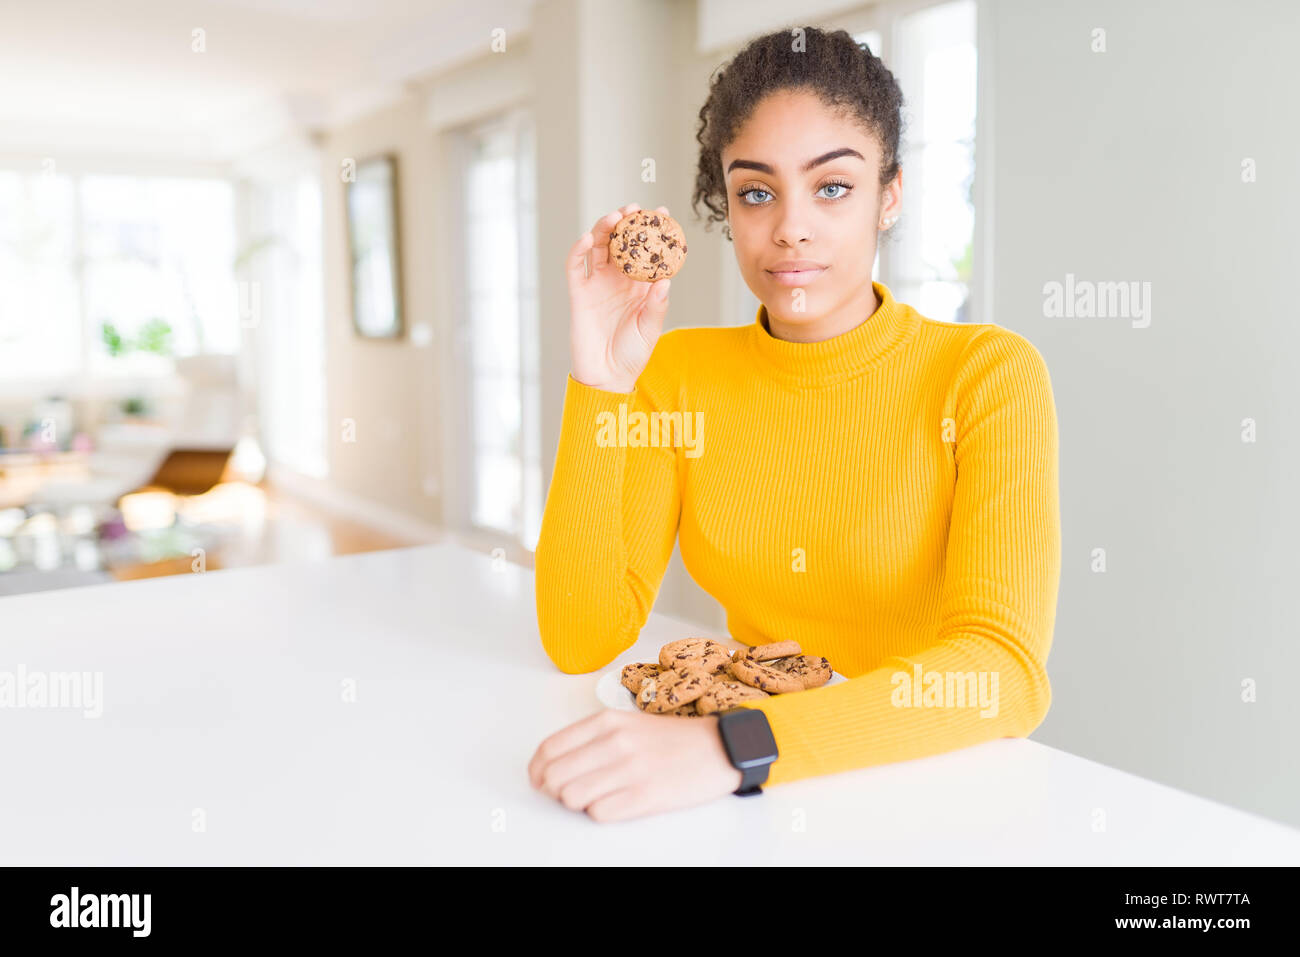 Young african american girl eating chocolate chips cookies as sweet snack with a confident expression on smart face thinking serious Stock Photo